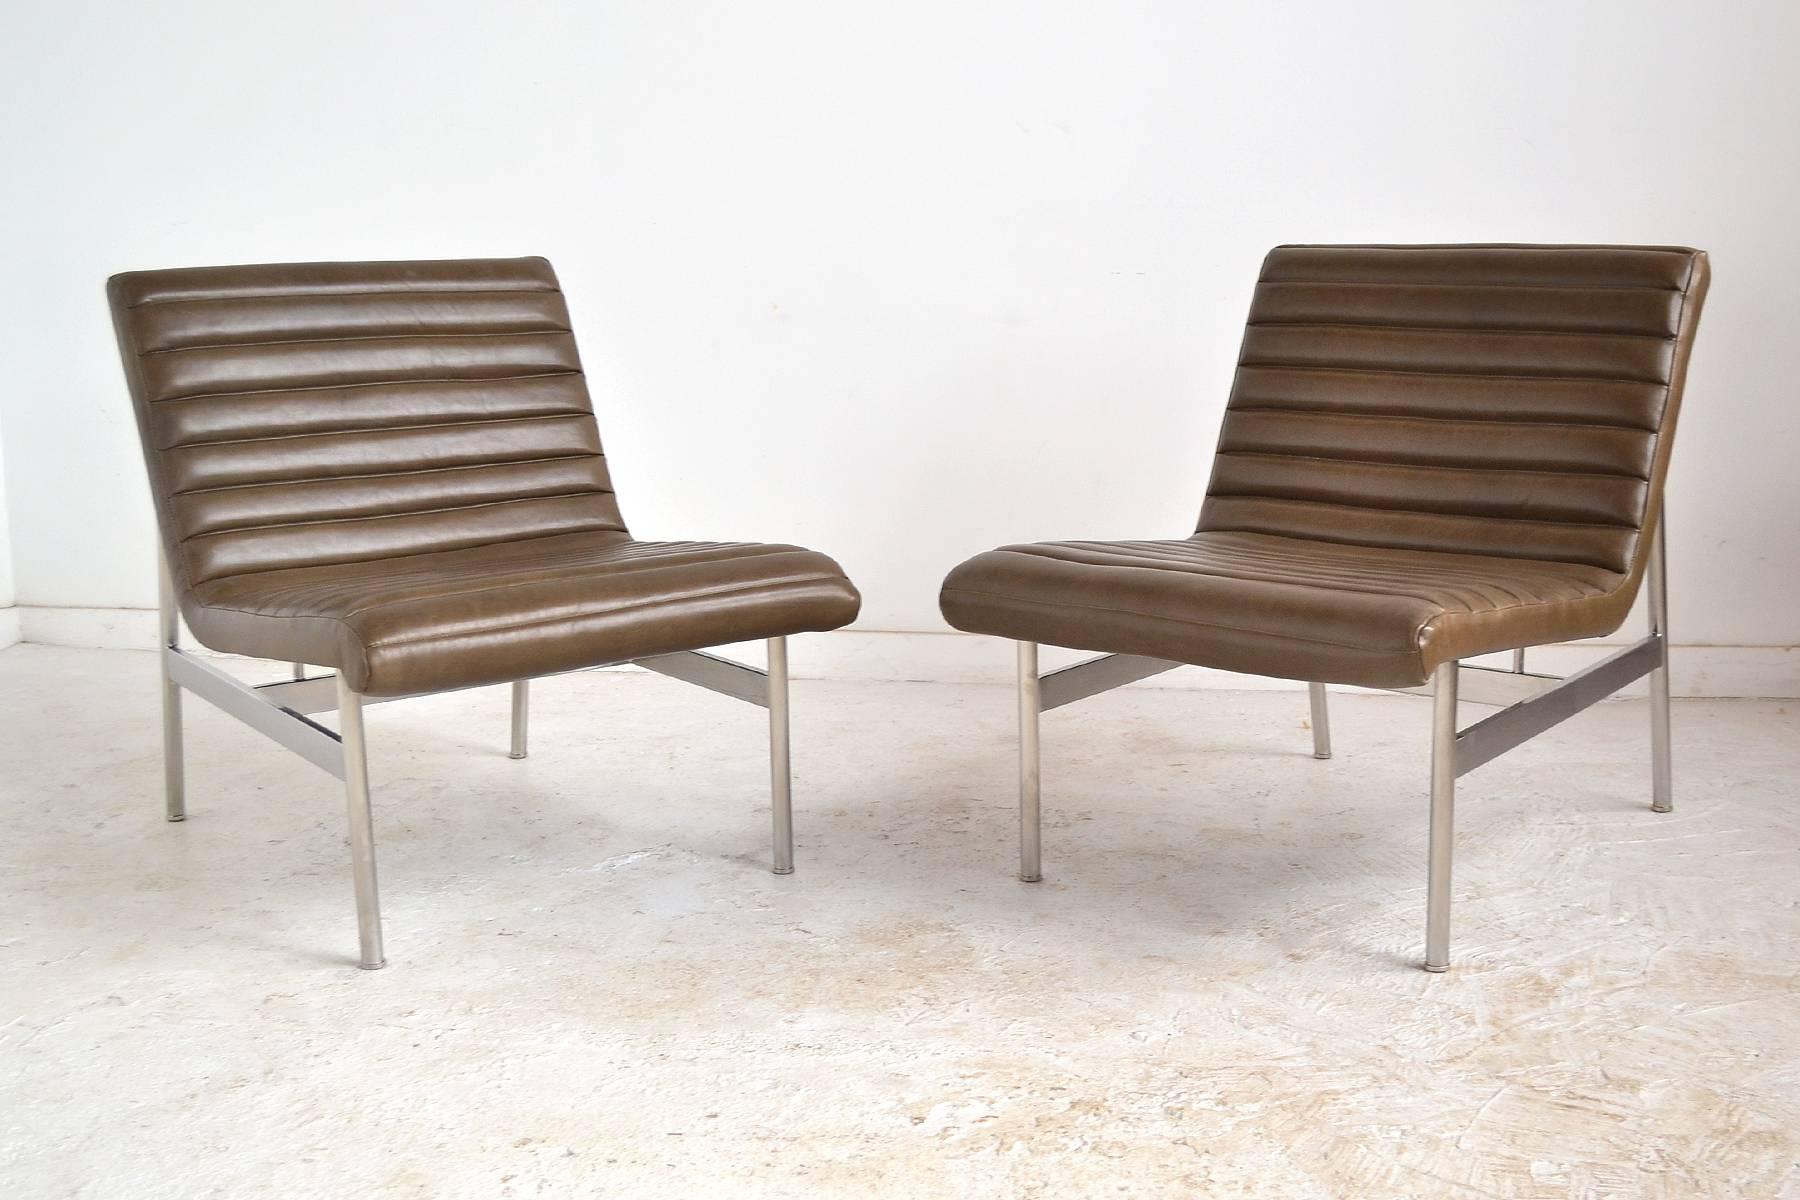 American Charles Pollock Pair of cp1 Lounge Chairs by Bernhardt